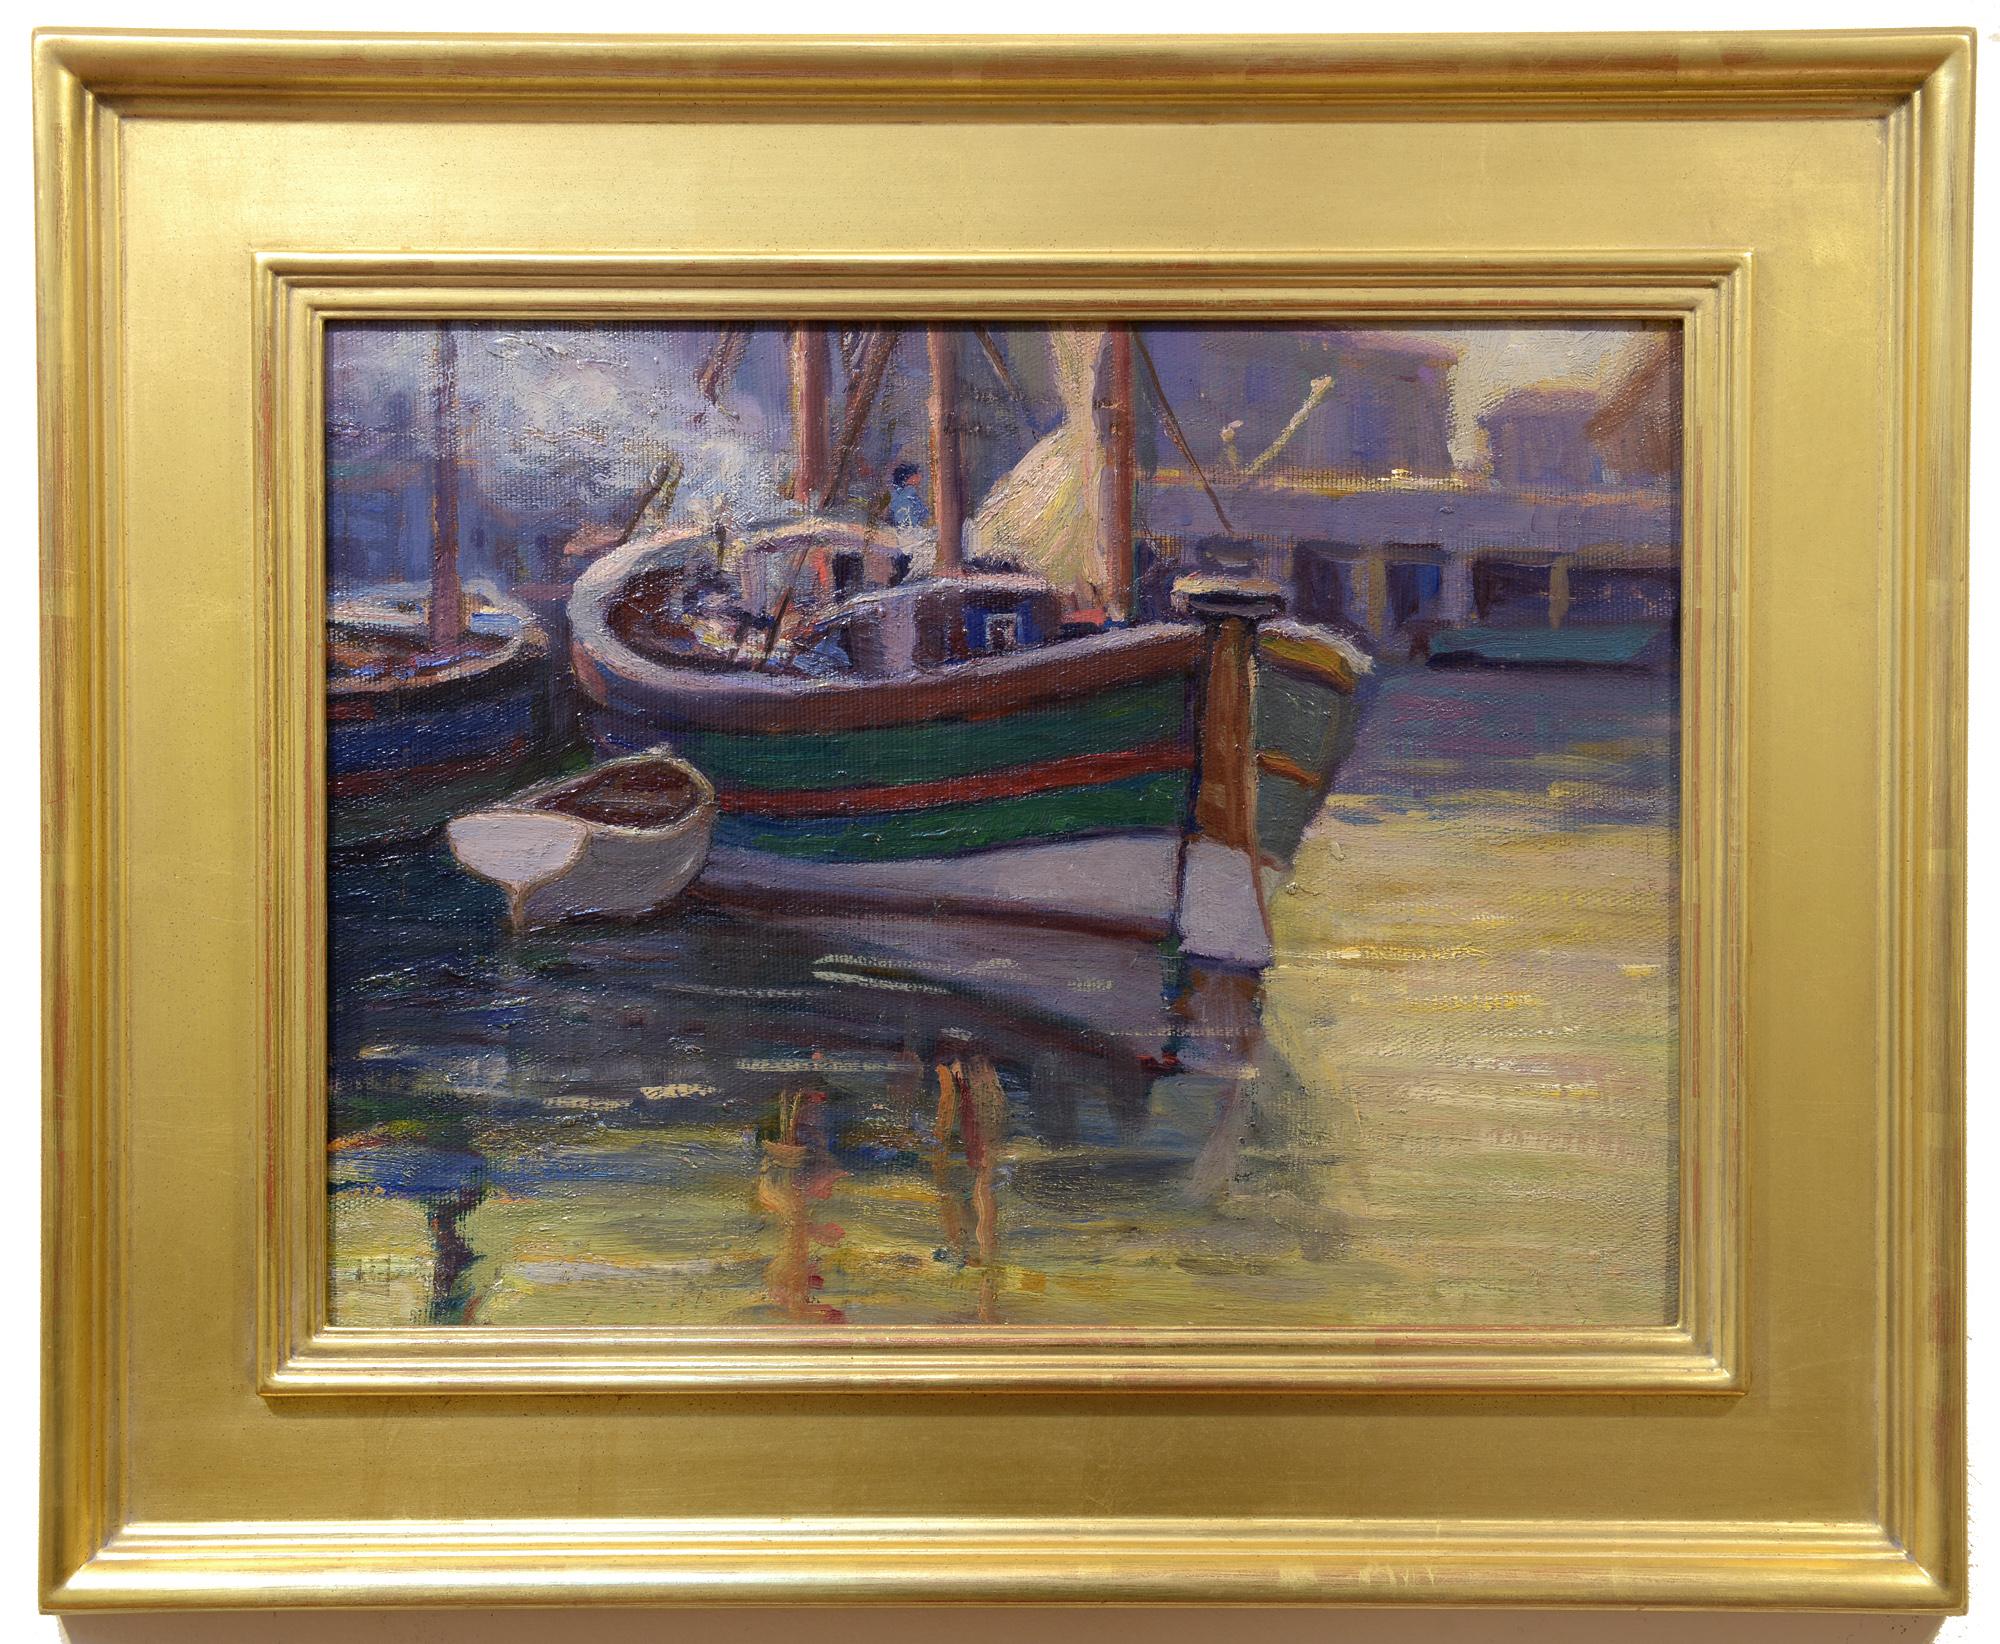 Harborfront, American Impressionist, 20th Century, Wooden Sailing Ships at Dock - Painting by Unknown